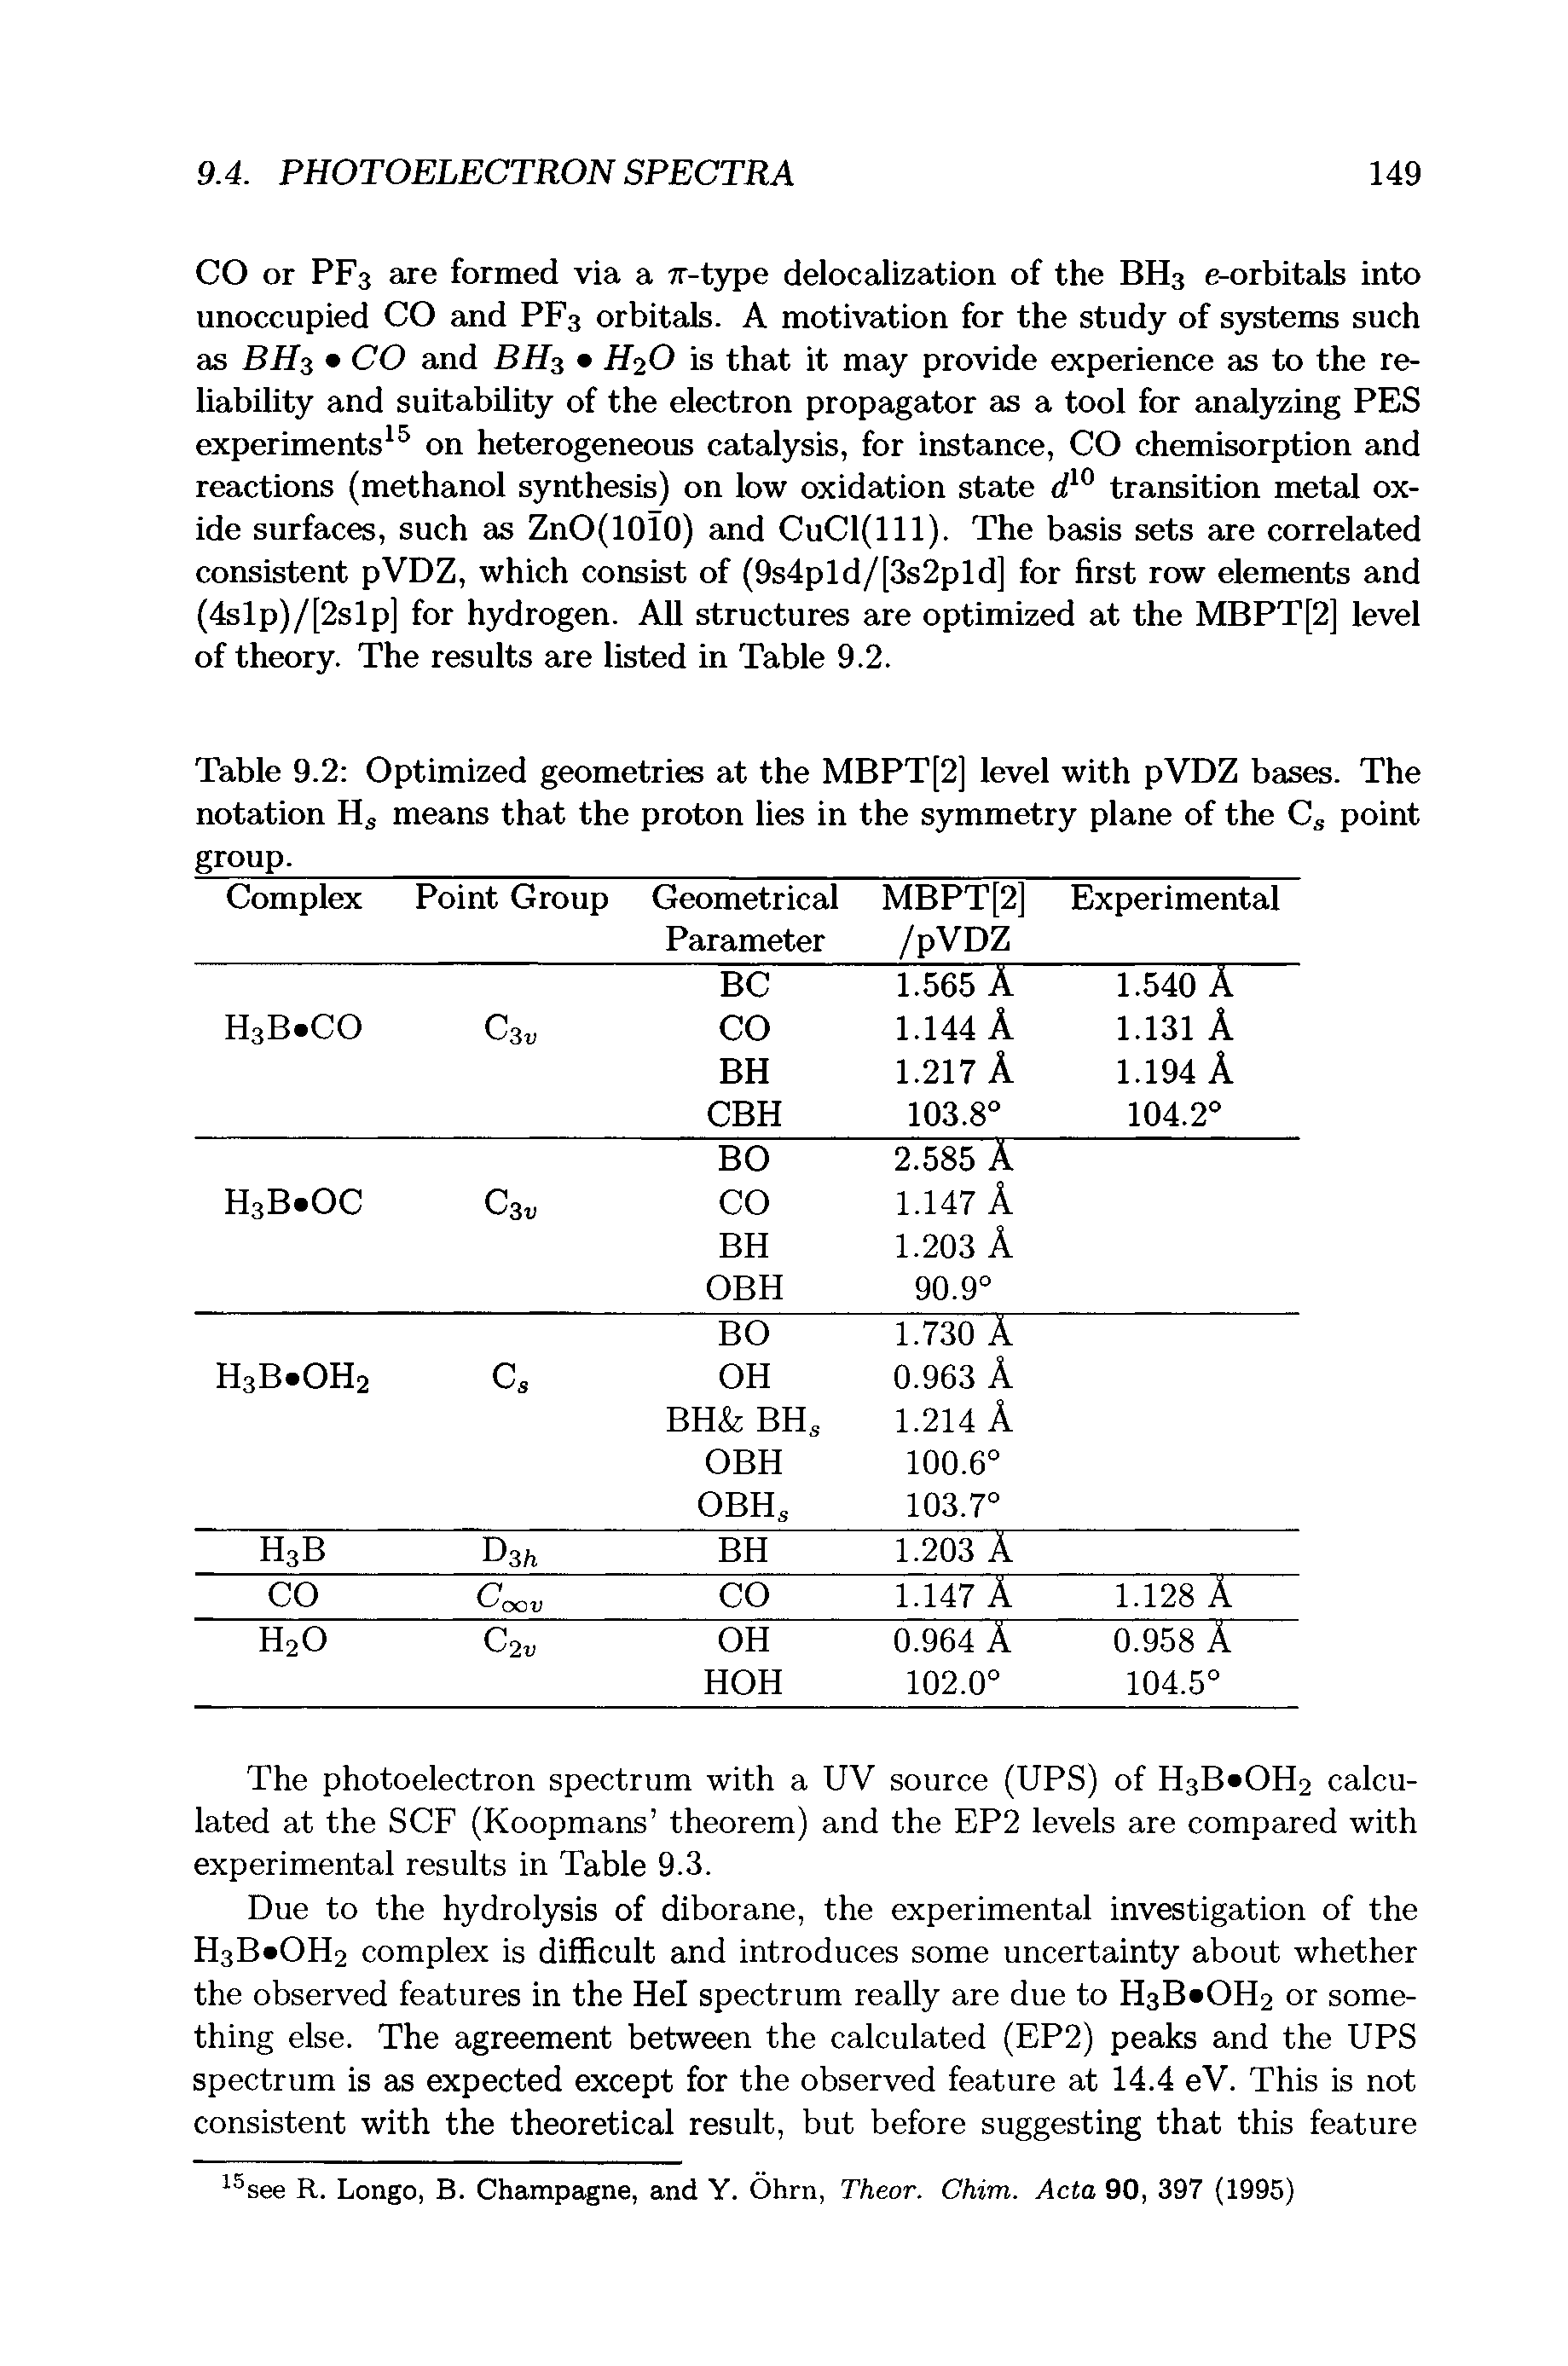 Table 9.2 Optimized geometries at the MBPT[2] level with pVDZ bases. The notation H means that the proton lies in the symmetry plane of the C point group.